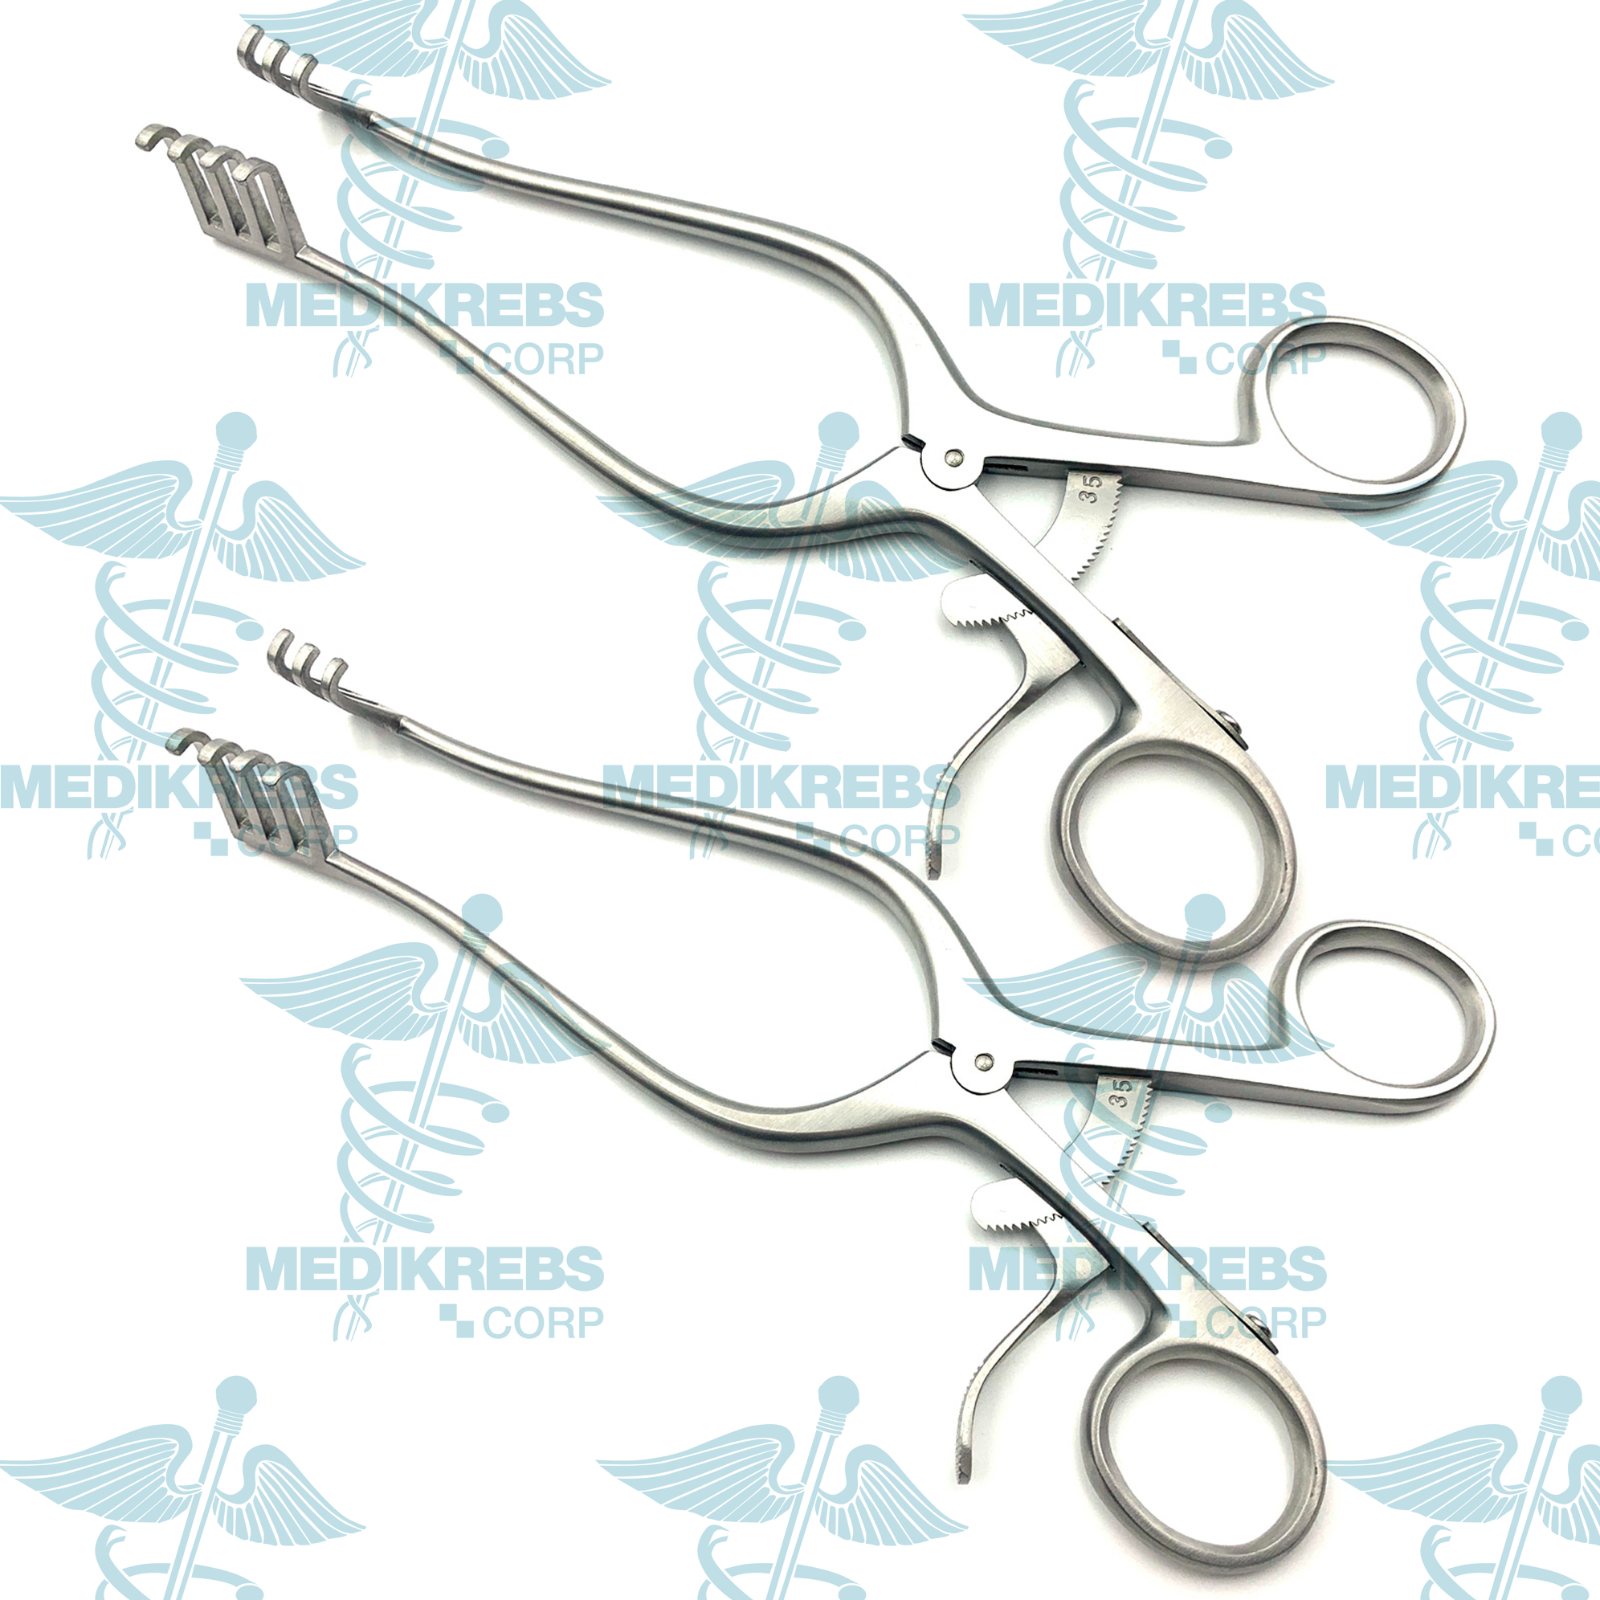 2 Pcs Adson Self Retaining Retractor Blunt 3 OR San Diego Mall Prongs OFFicial store cm 4 20 x